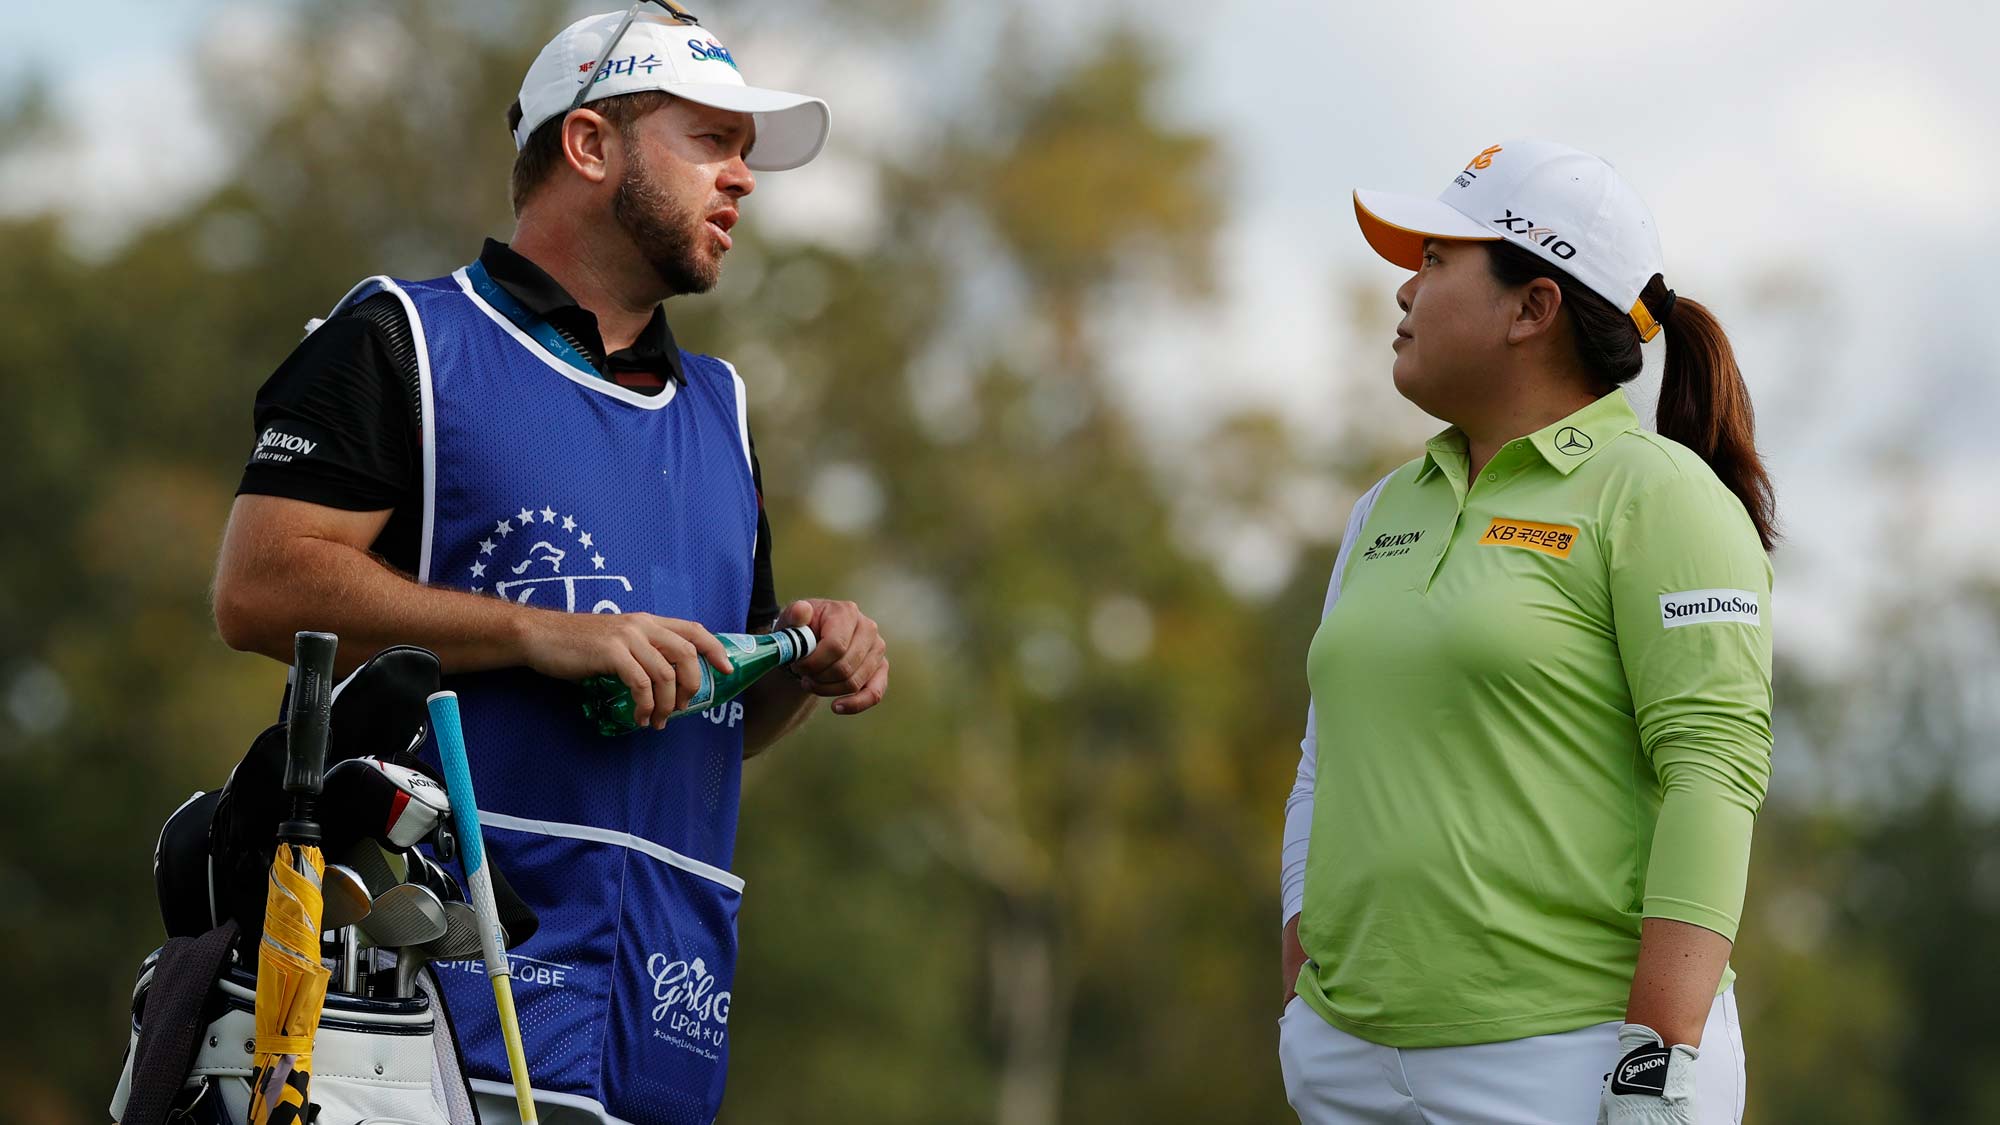 Inbee Park of Korea talks with her caddie before hitting her tee shot on the 6th hole during the first round of the Cognizant Founders Cup